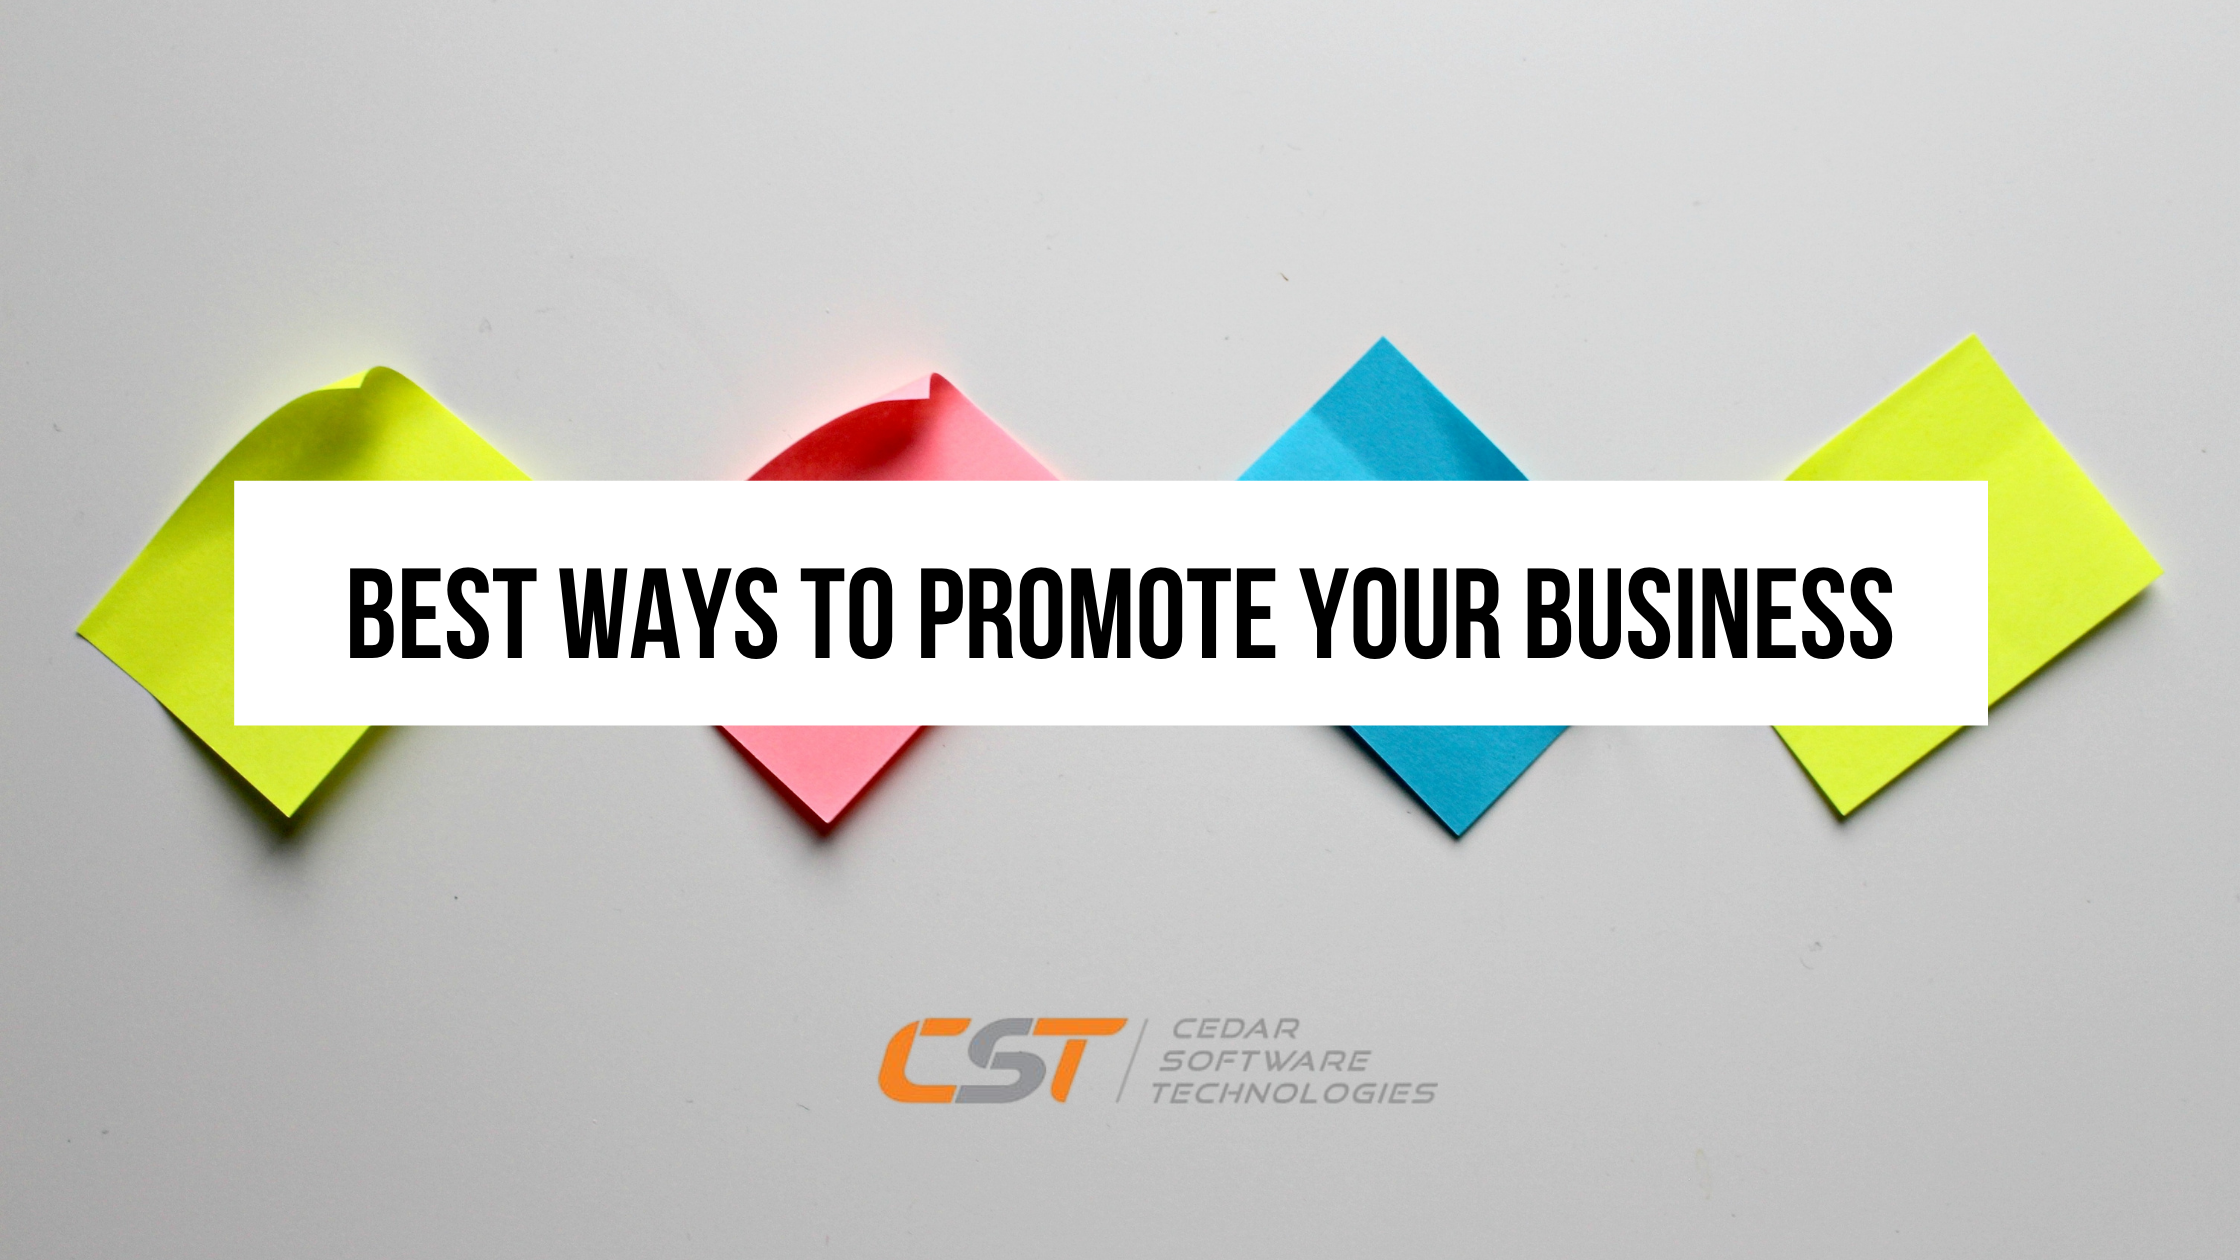 Best ways to promote your business